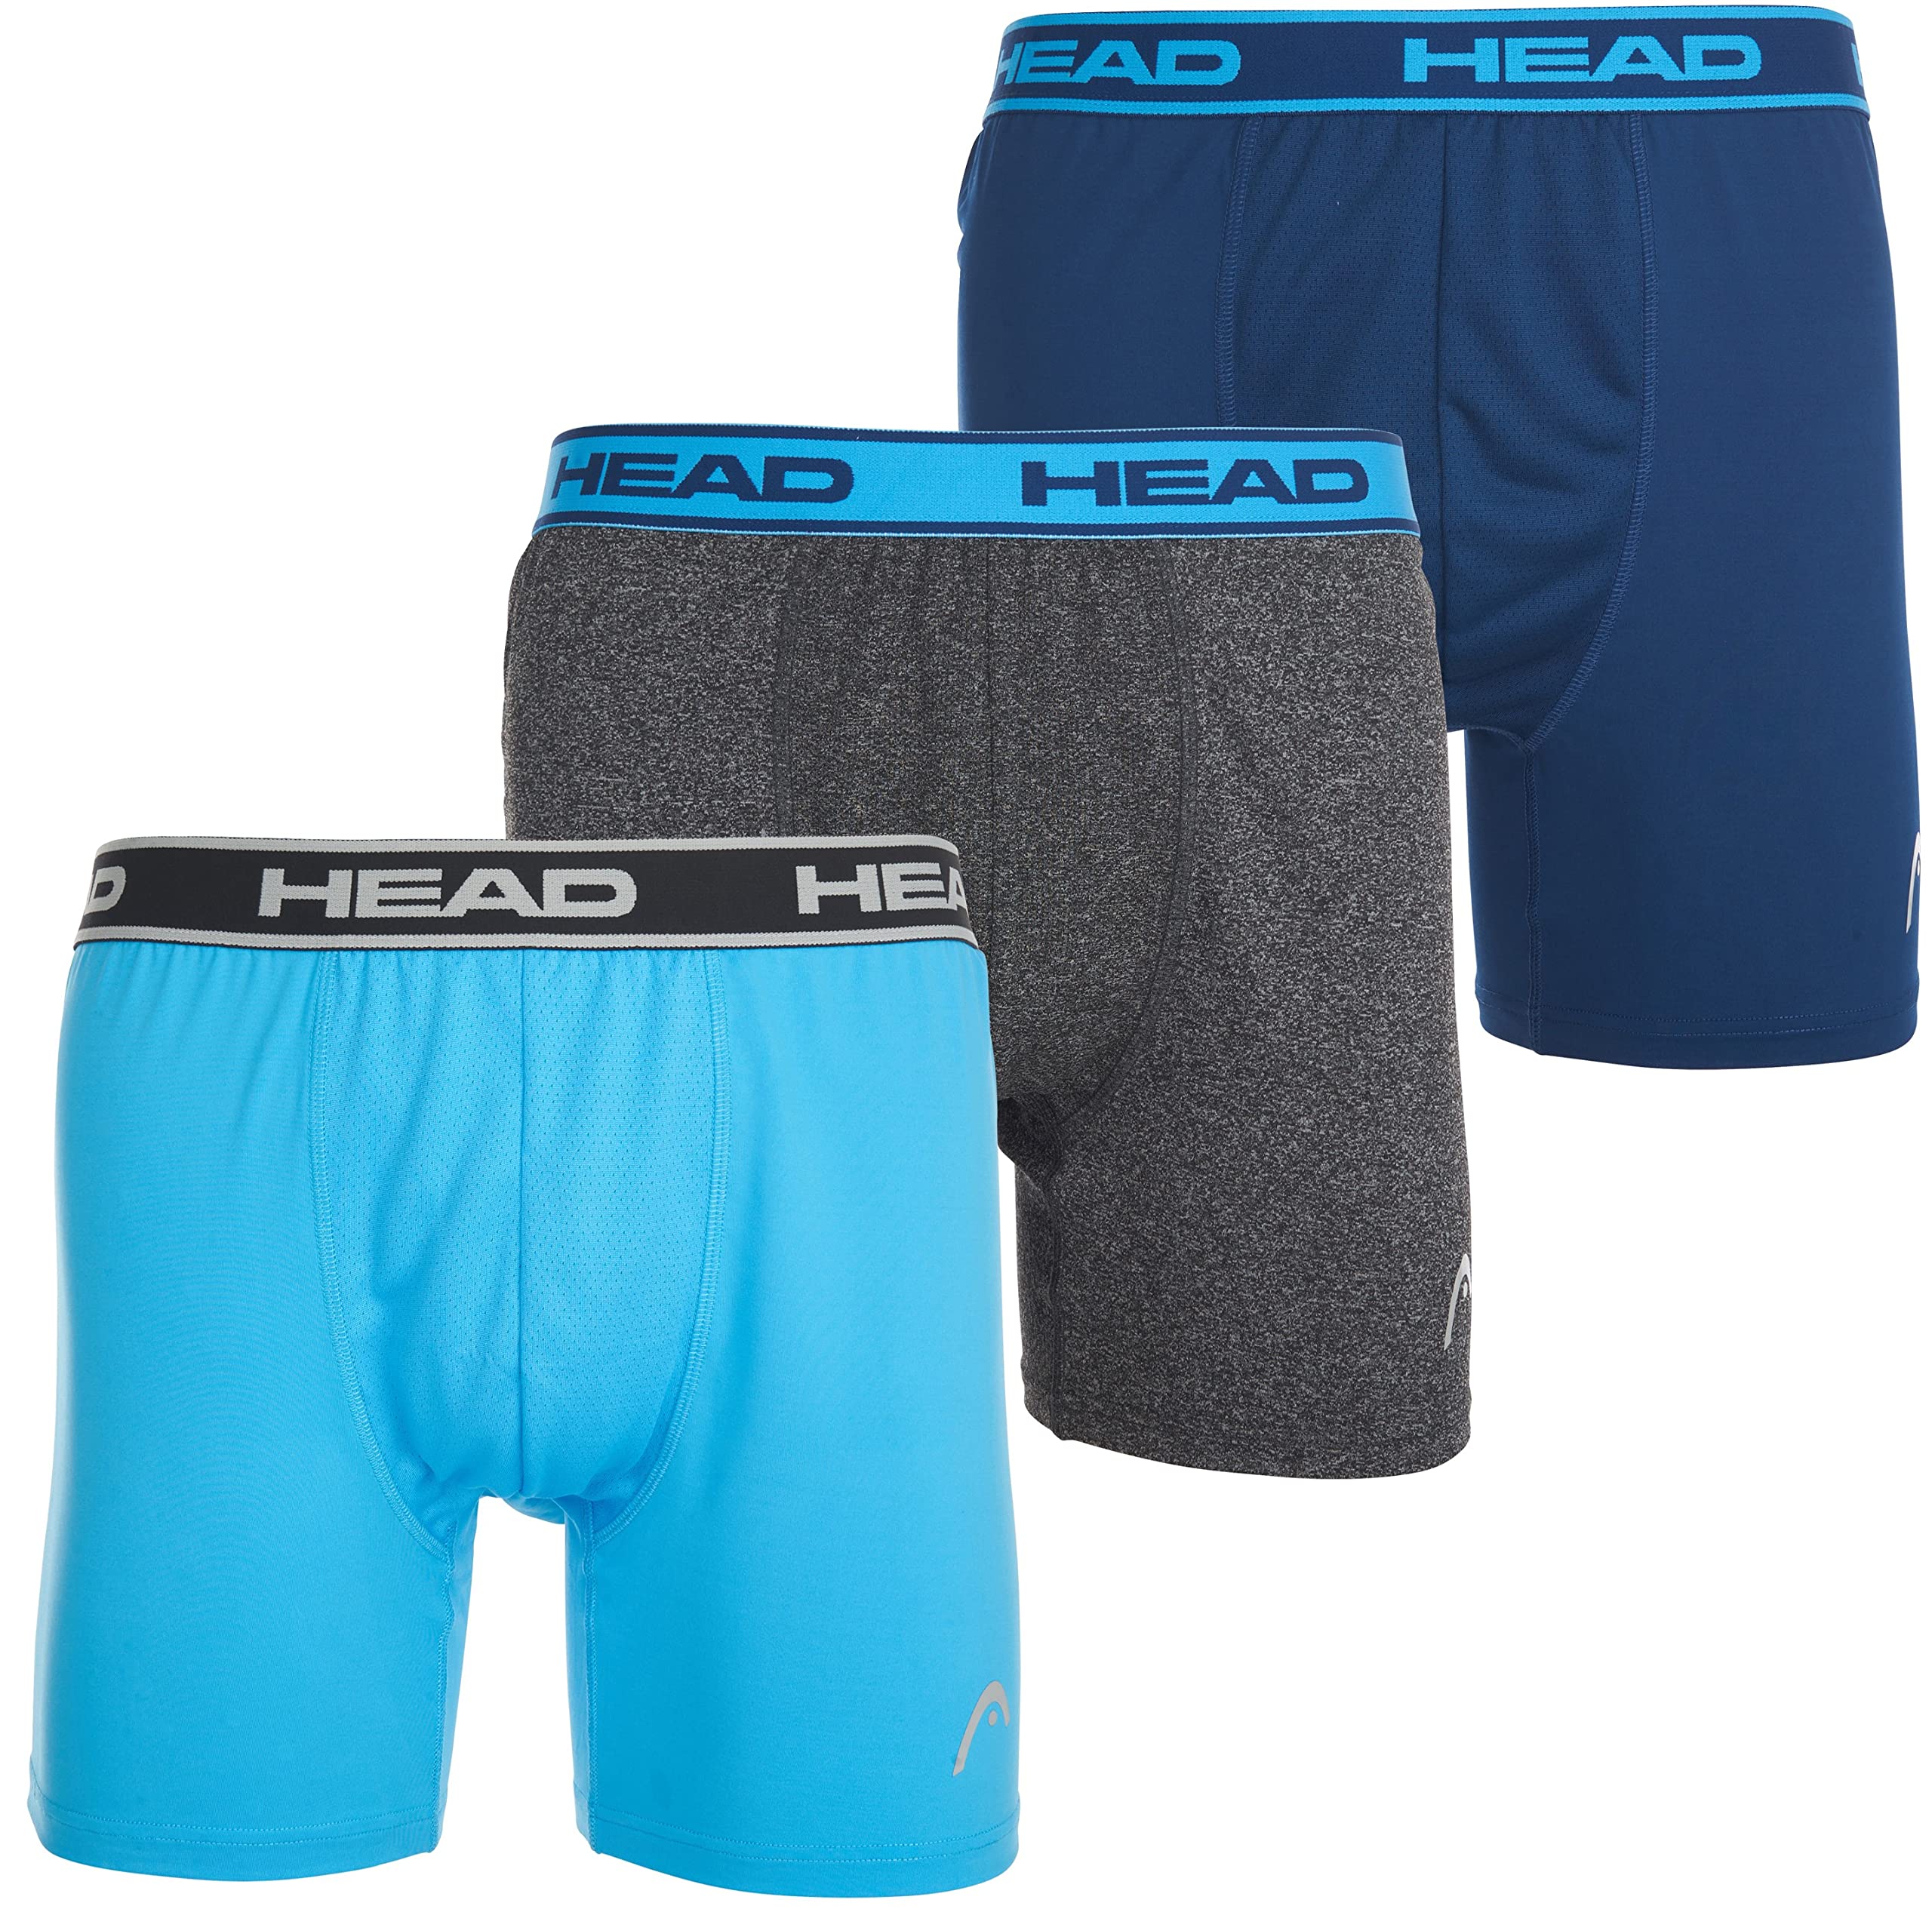 HEAD Mens Performance Underwear - 3-Pack Stretch Performance Boxer Briefs Breathable No Fly Up to Size 5X